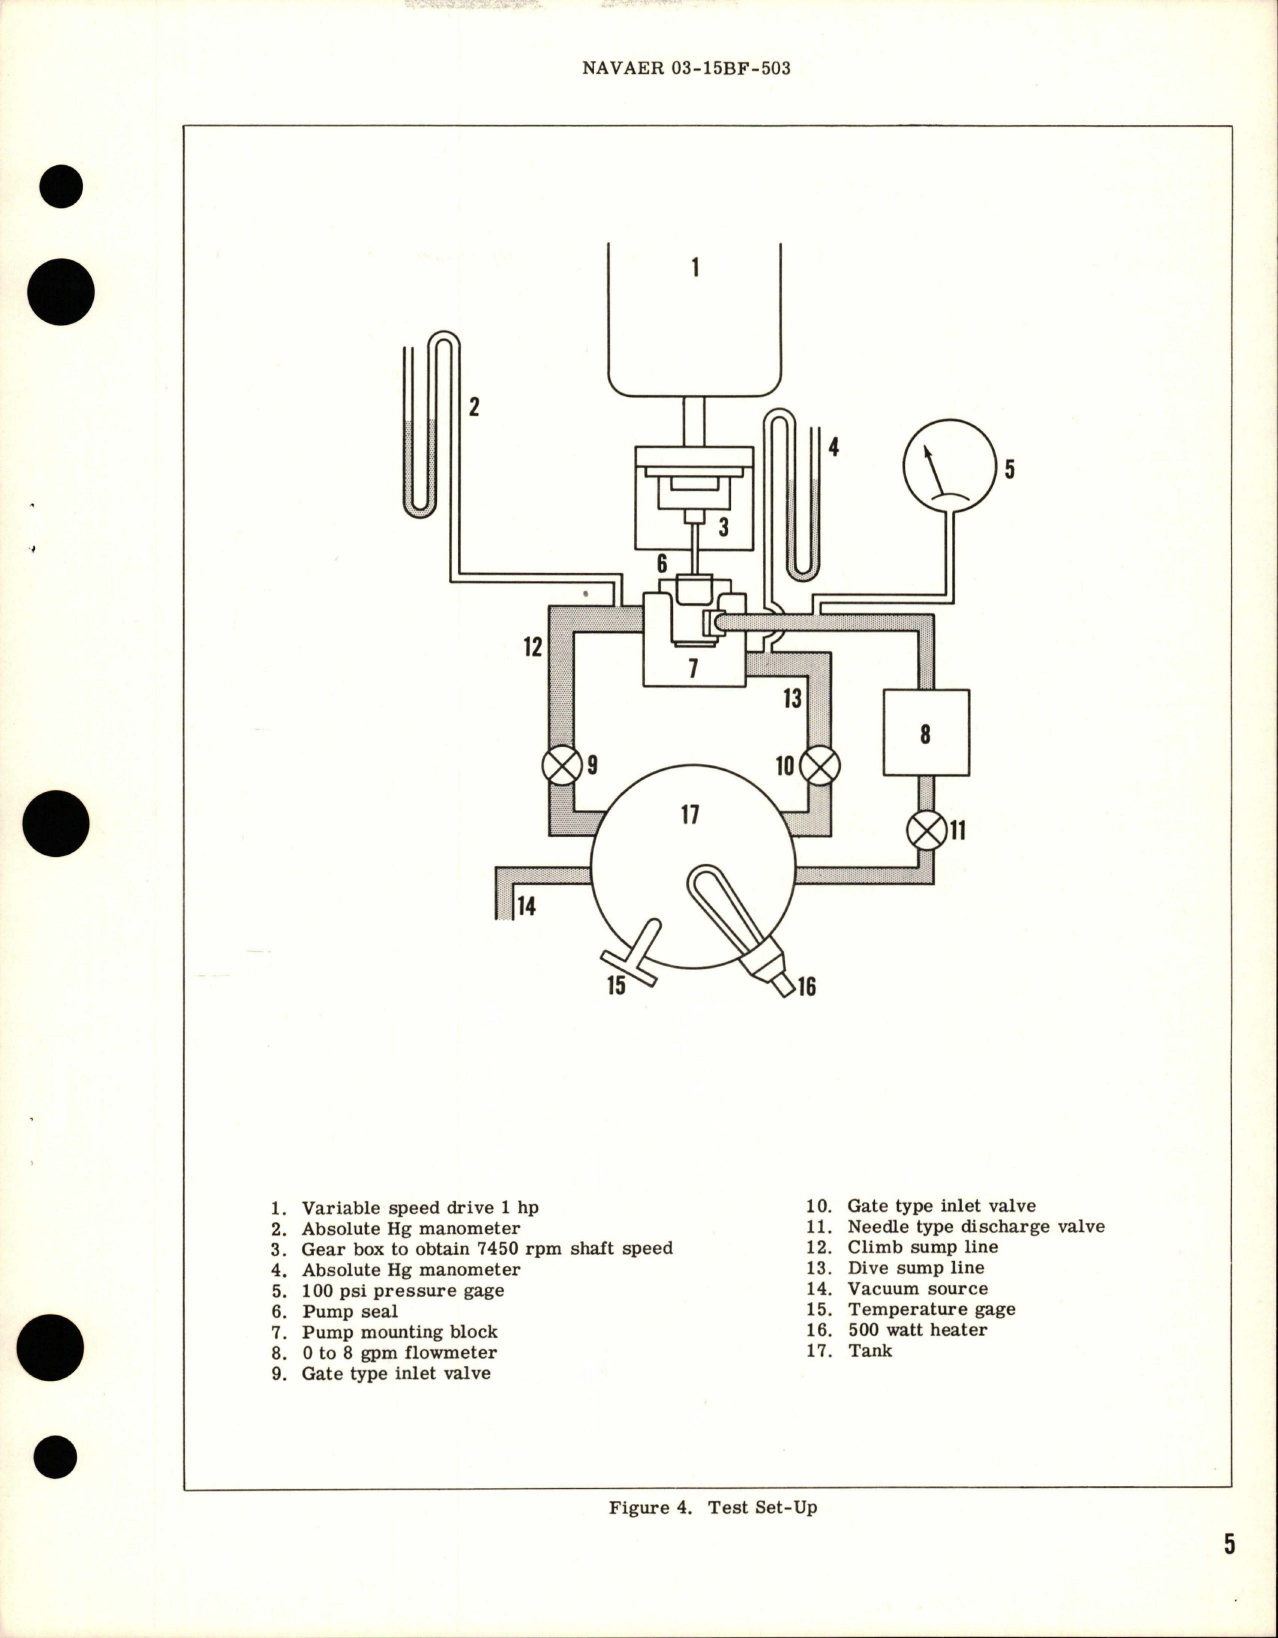 Sample page 5 from AirCorps Library document: Overhaul Instructions with Parts for Two-Element Oil Scavenge Pump - Model RG 10500 C1